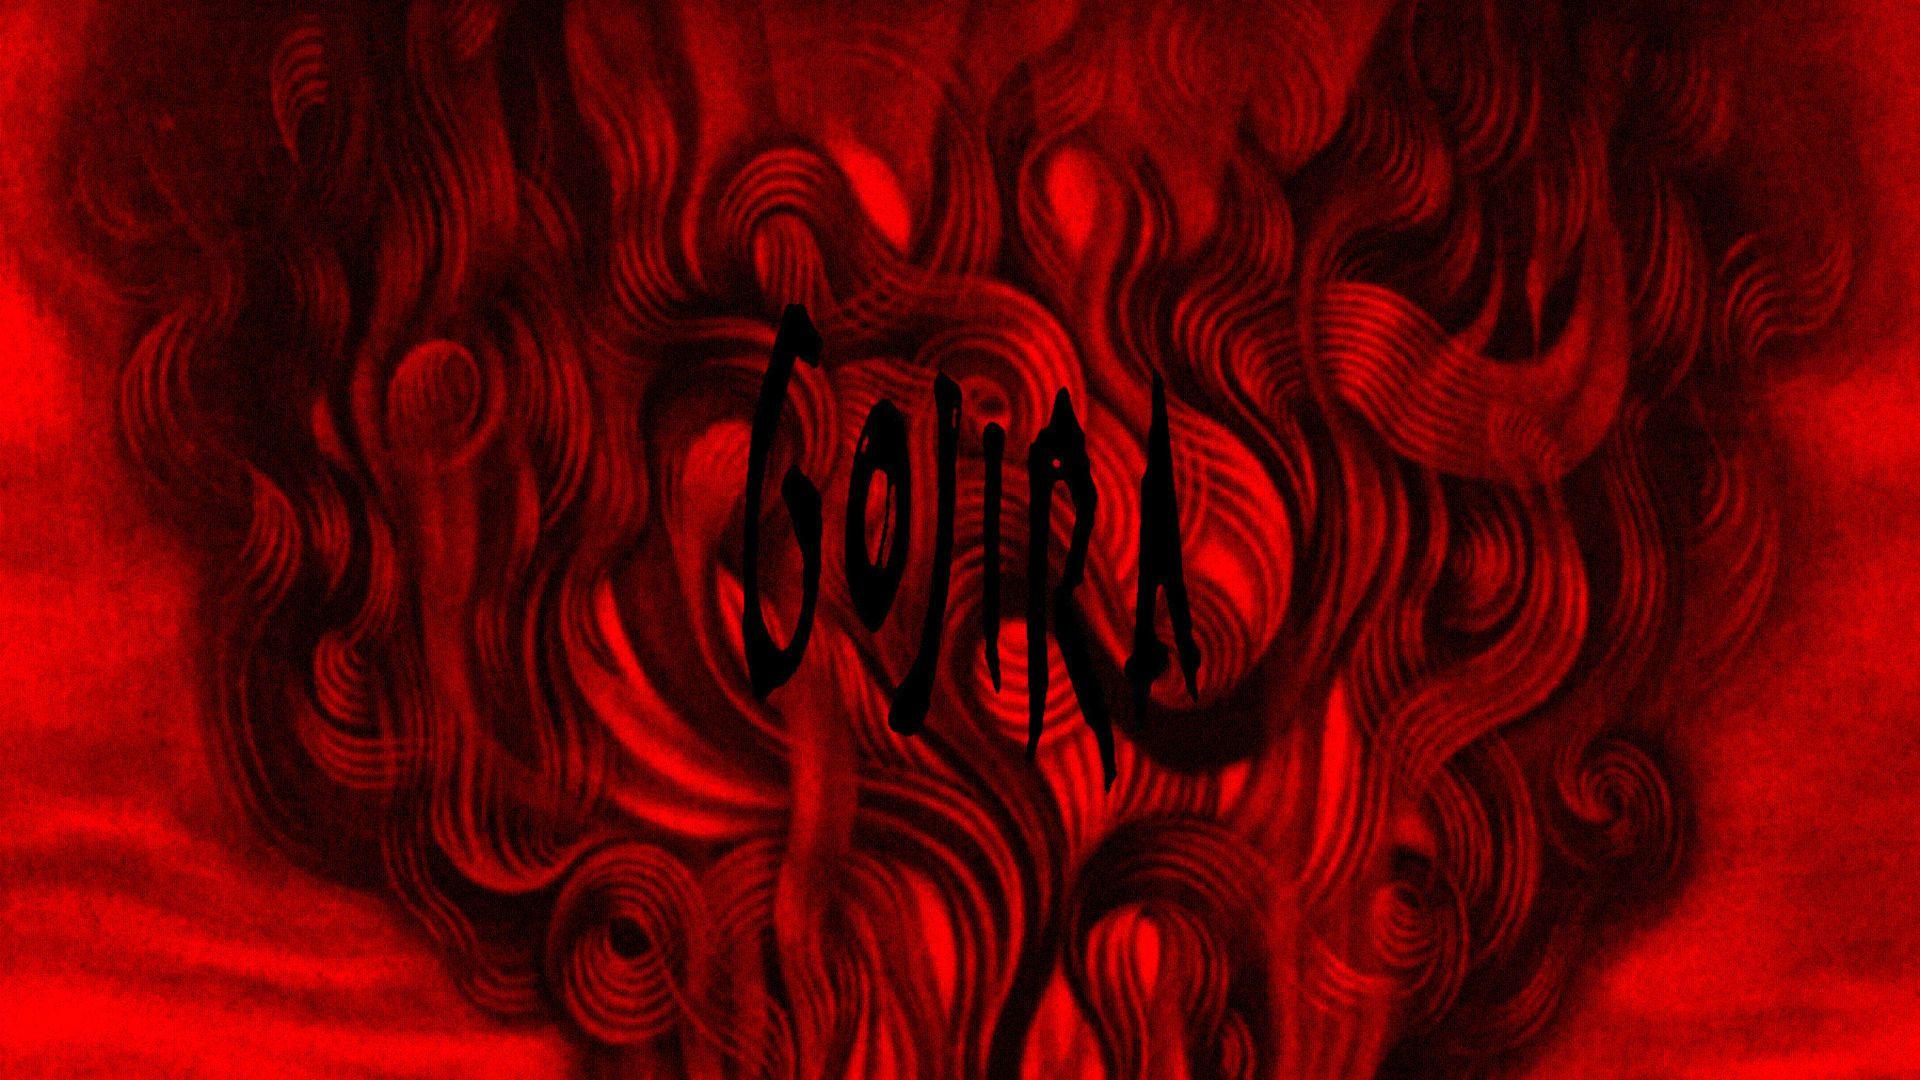 Download Gojira wallpapers for mobile phone free Gojira HD pictures